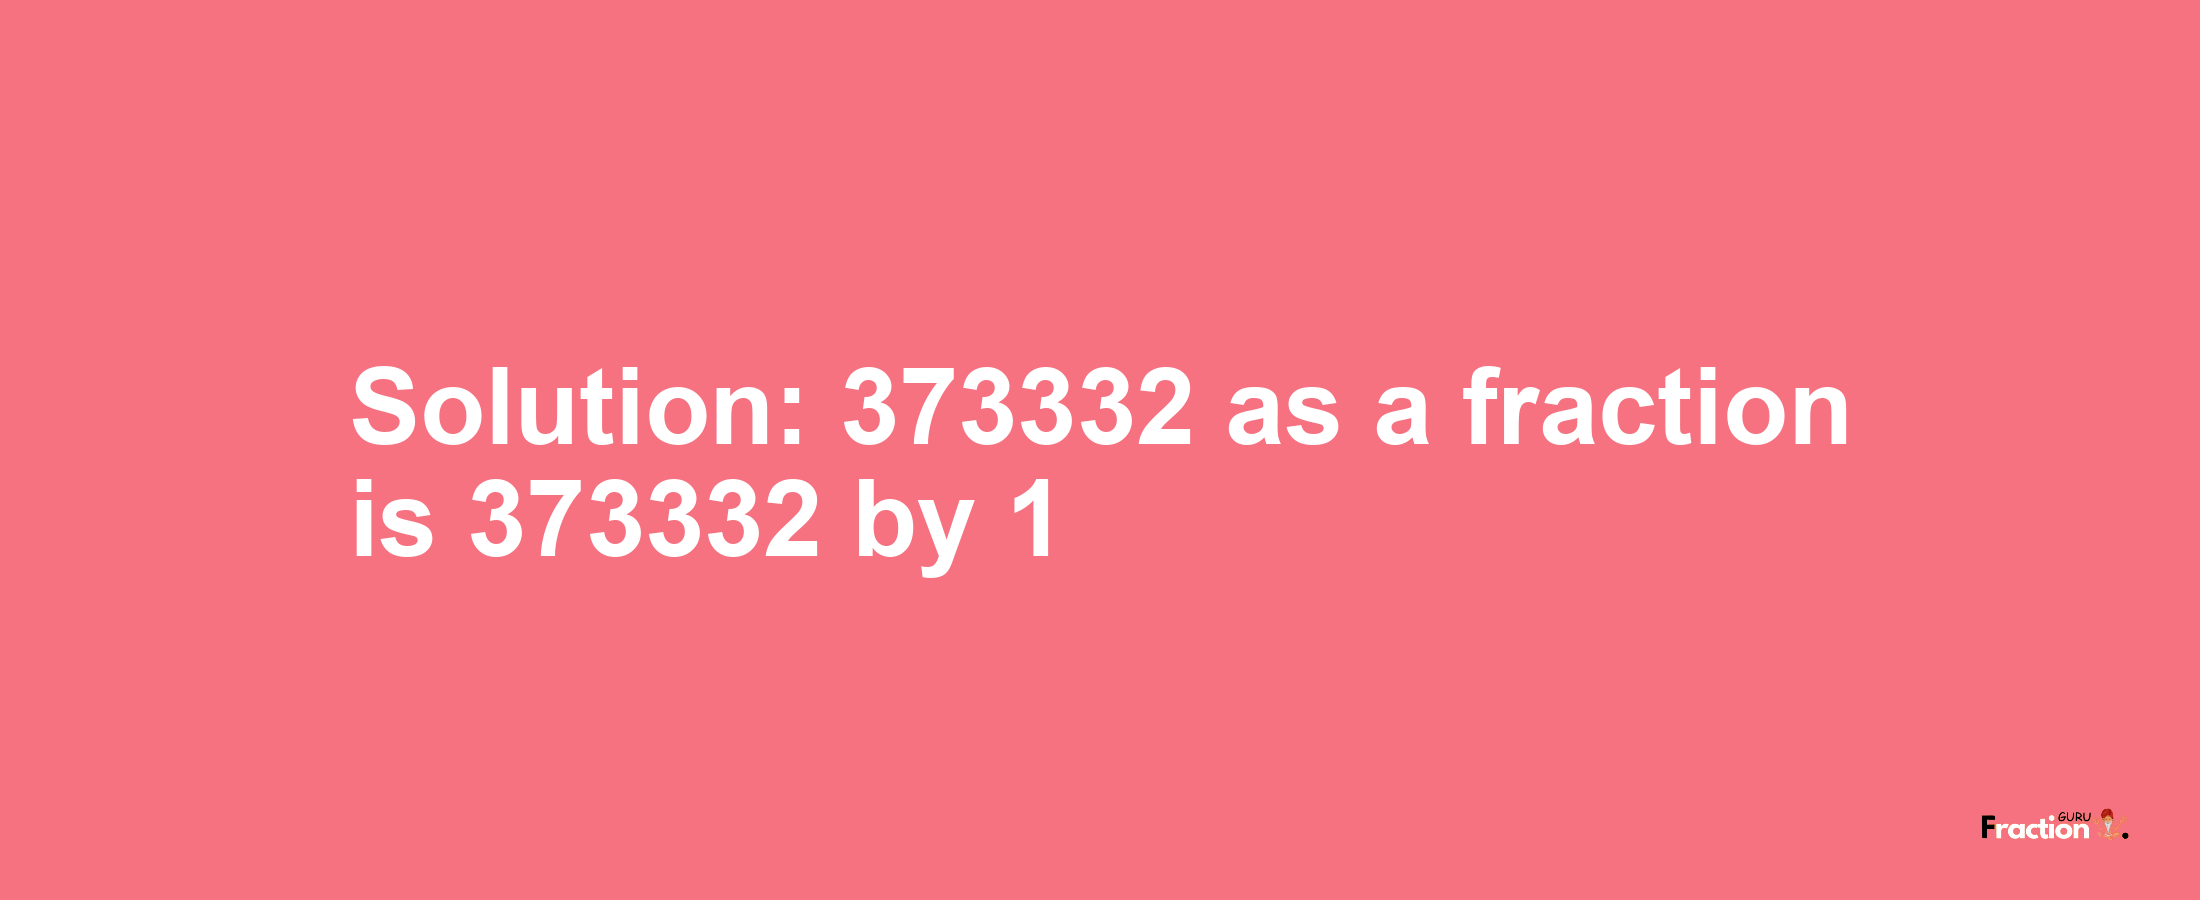 Solution:373332 as a fraction is 373332/1